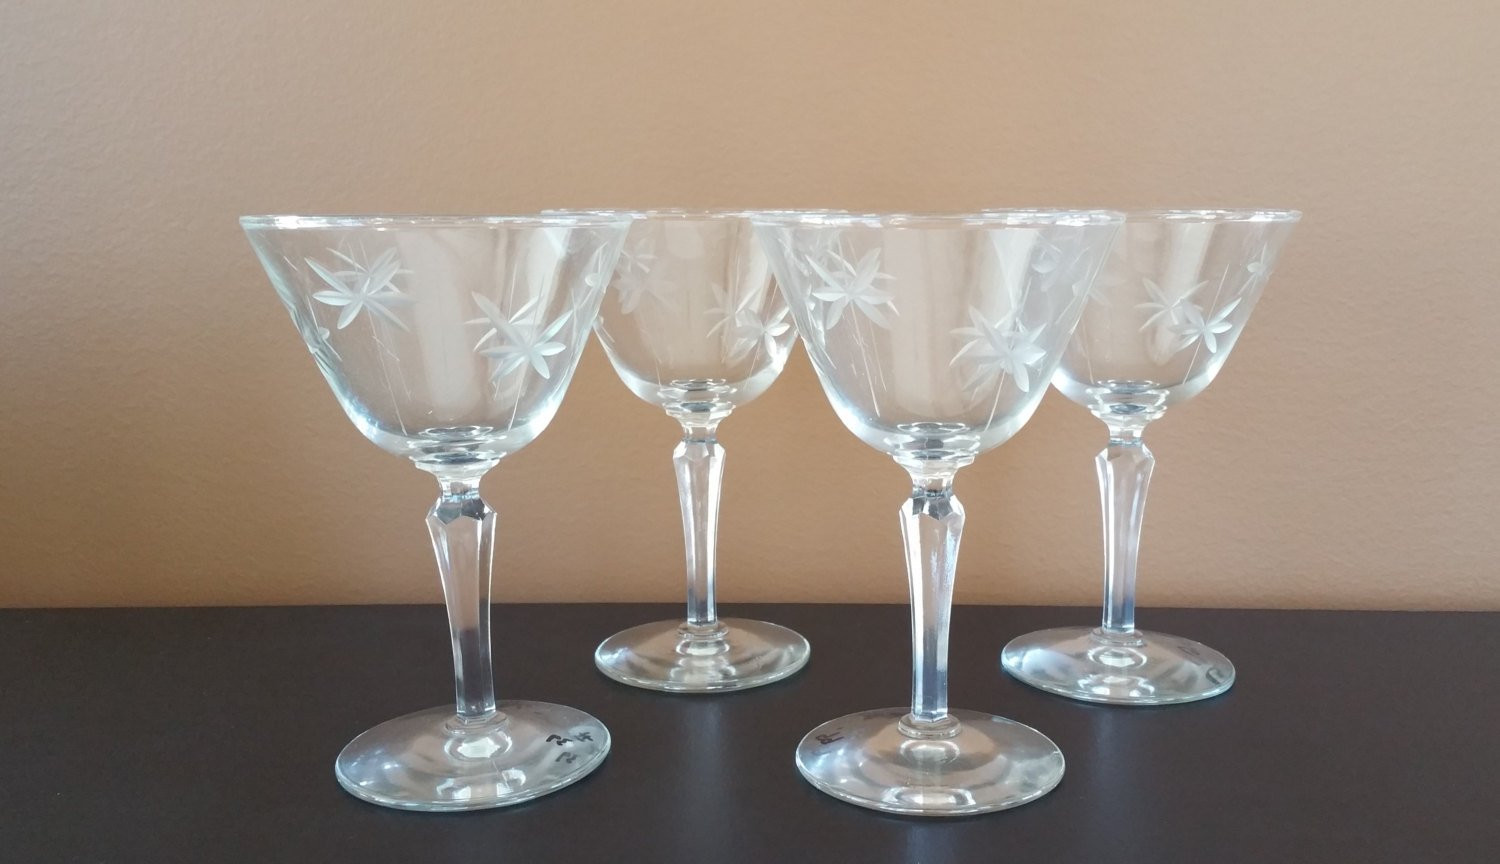 16 Lovely Cristal D Arques Lead Crystal Vase 2024 free download cristal d arques lead crystal vase of vintage crystal cordial glasses champagne coupe javit star etsy throughout dc29fc294c28epowiac299ksz